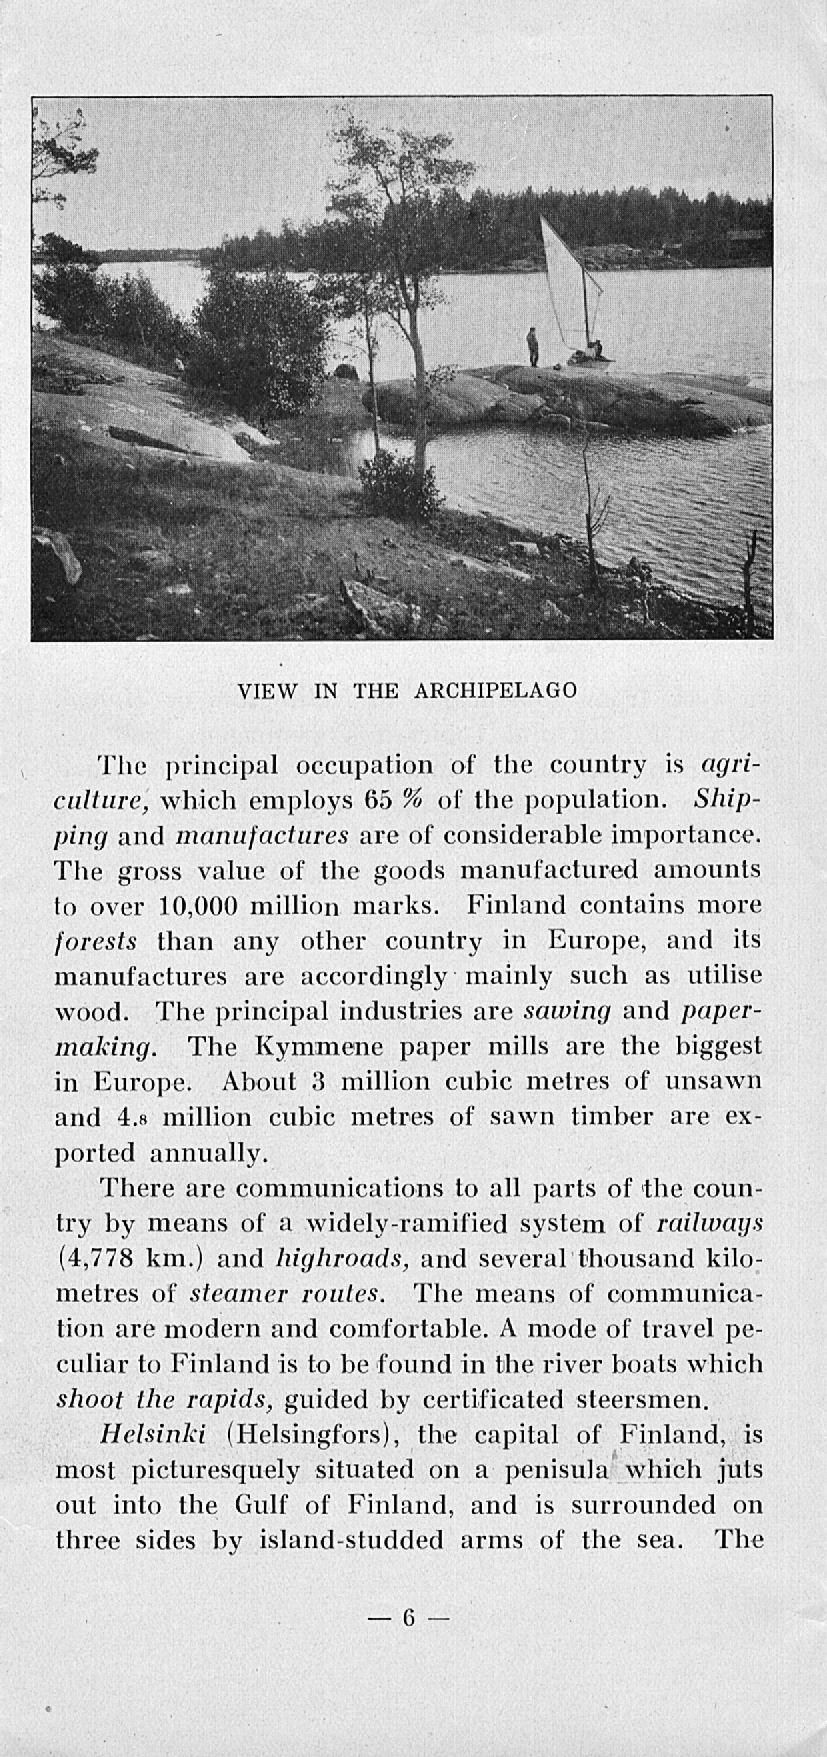 VIEW IN THE ARCHIPELAGO I. The principal occupation of the country is agriculture, which employs 65 % of the population. Shipping and manufactures are of considerable importance.